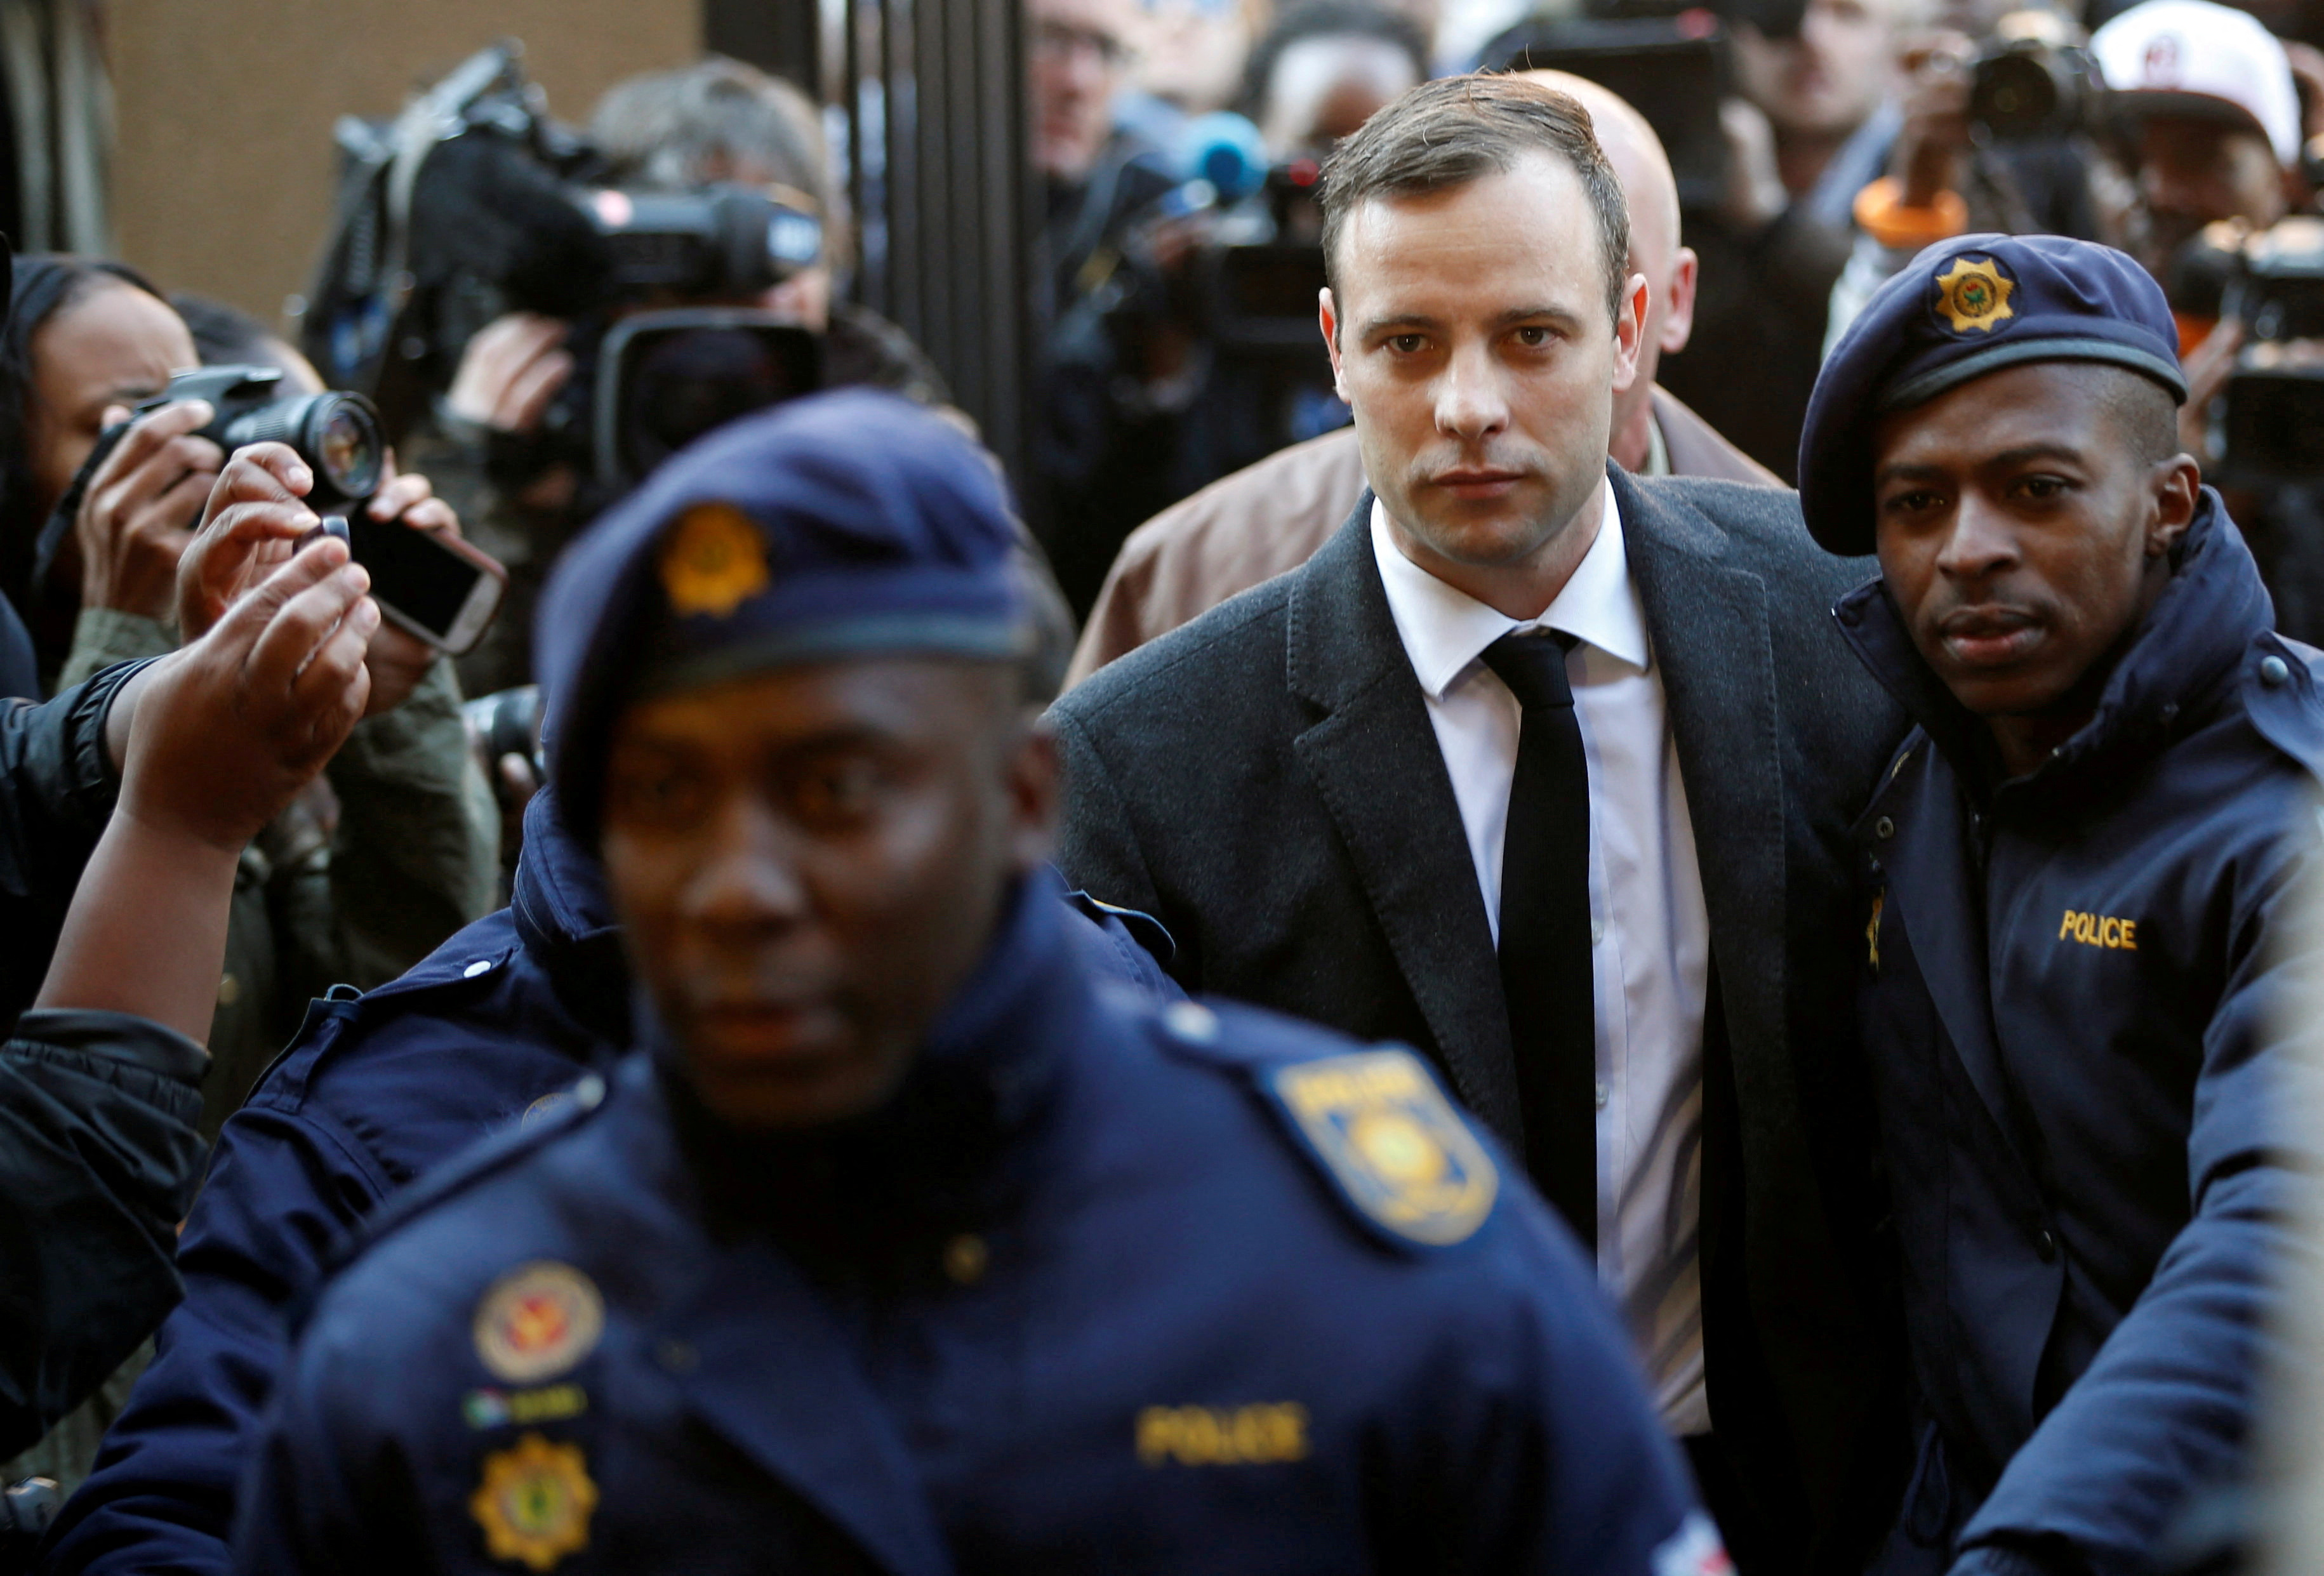 Olympic and Paralympic track star Oscar Pistorius is escorted by police officers as he arrives for his sententencing for the 2013 murder of his girlfriend Reeva Steenkamp, at North Gauteng High Court in Pretoria